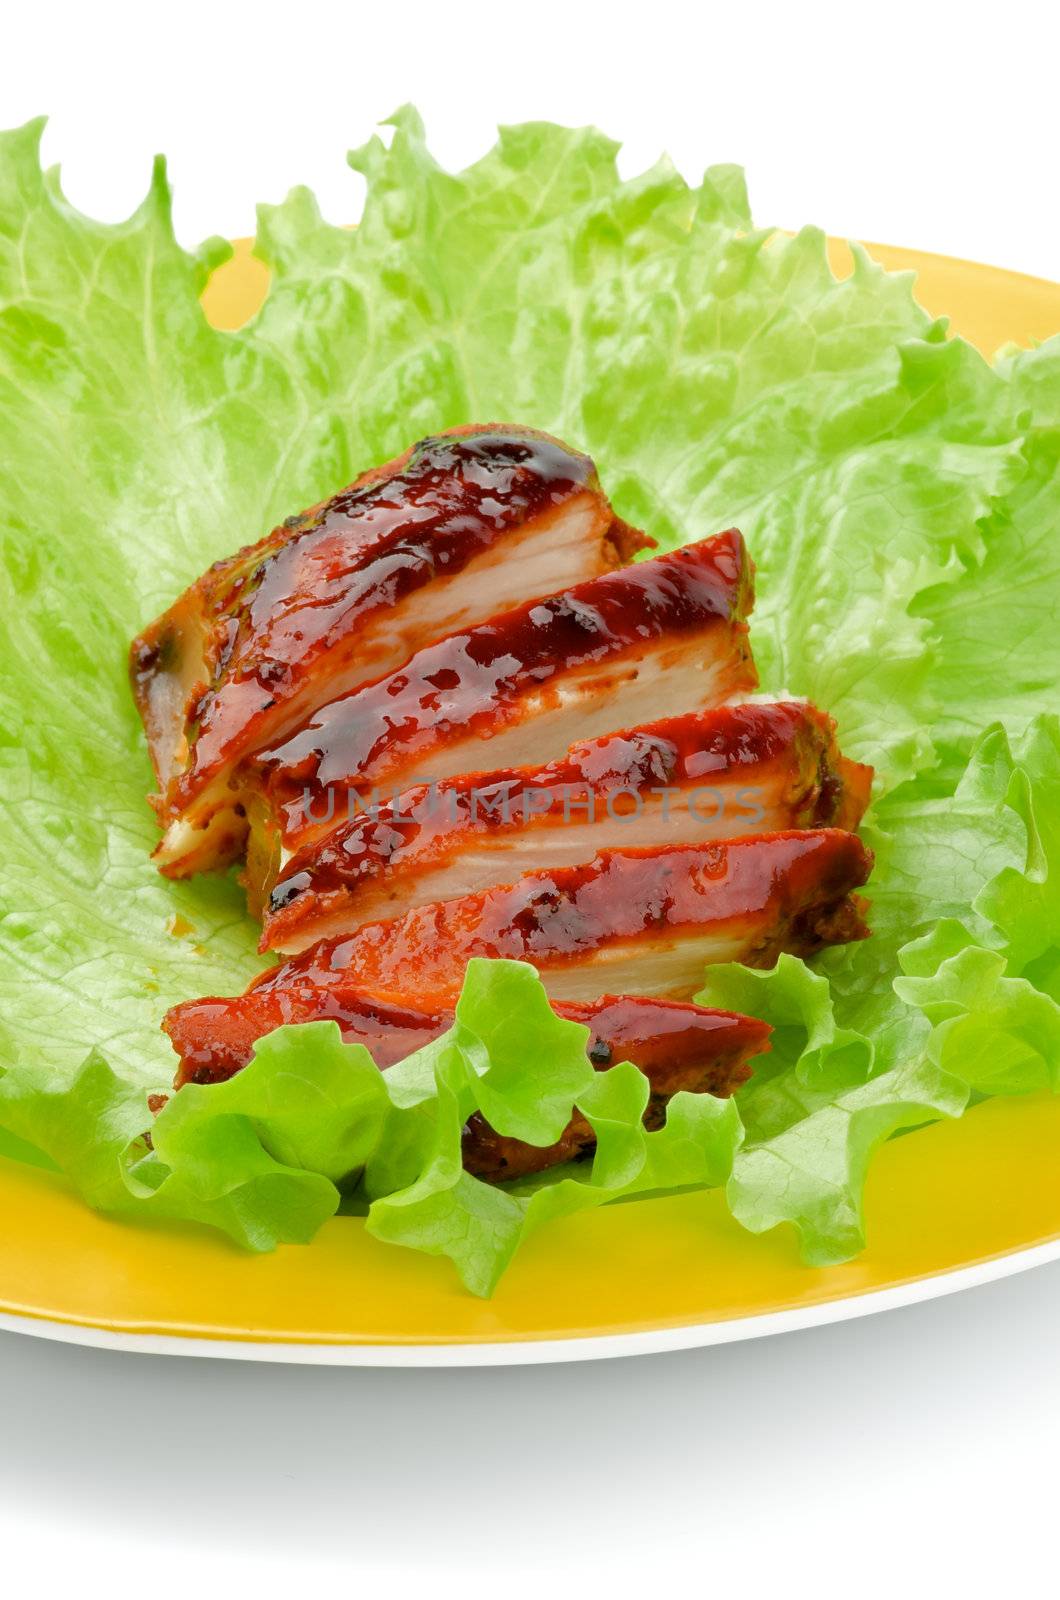 Sliced Barbecue Chicken Breast with Lettuce on Yellow Plate closeup